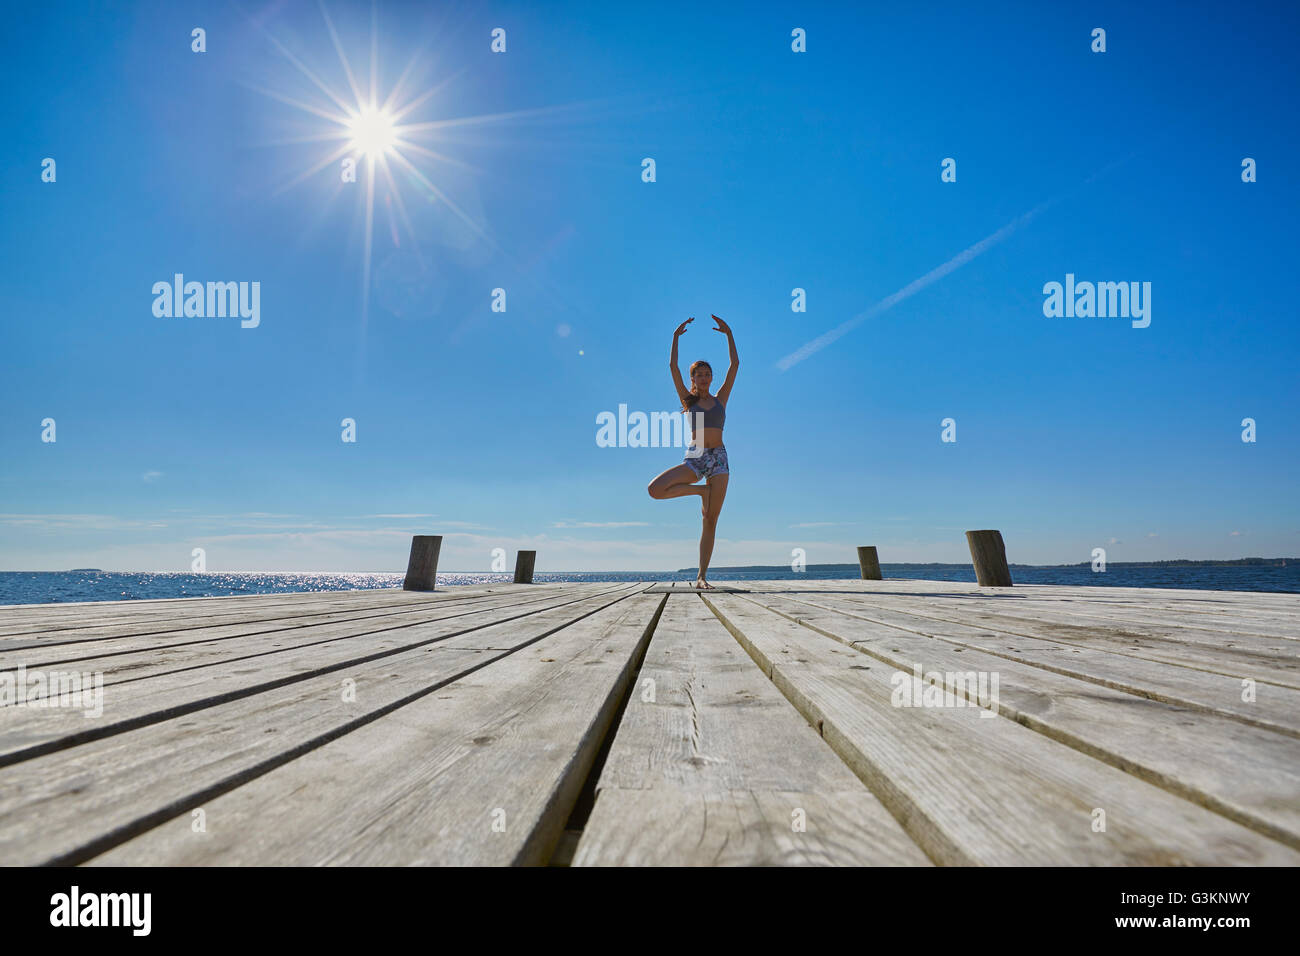 Mid distant view of woman on pier, standing on one leg arms raised Stock Photo